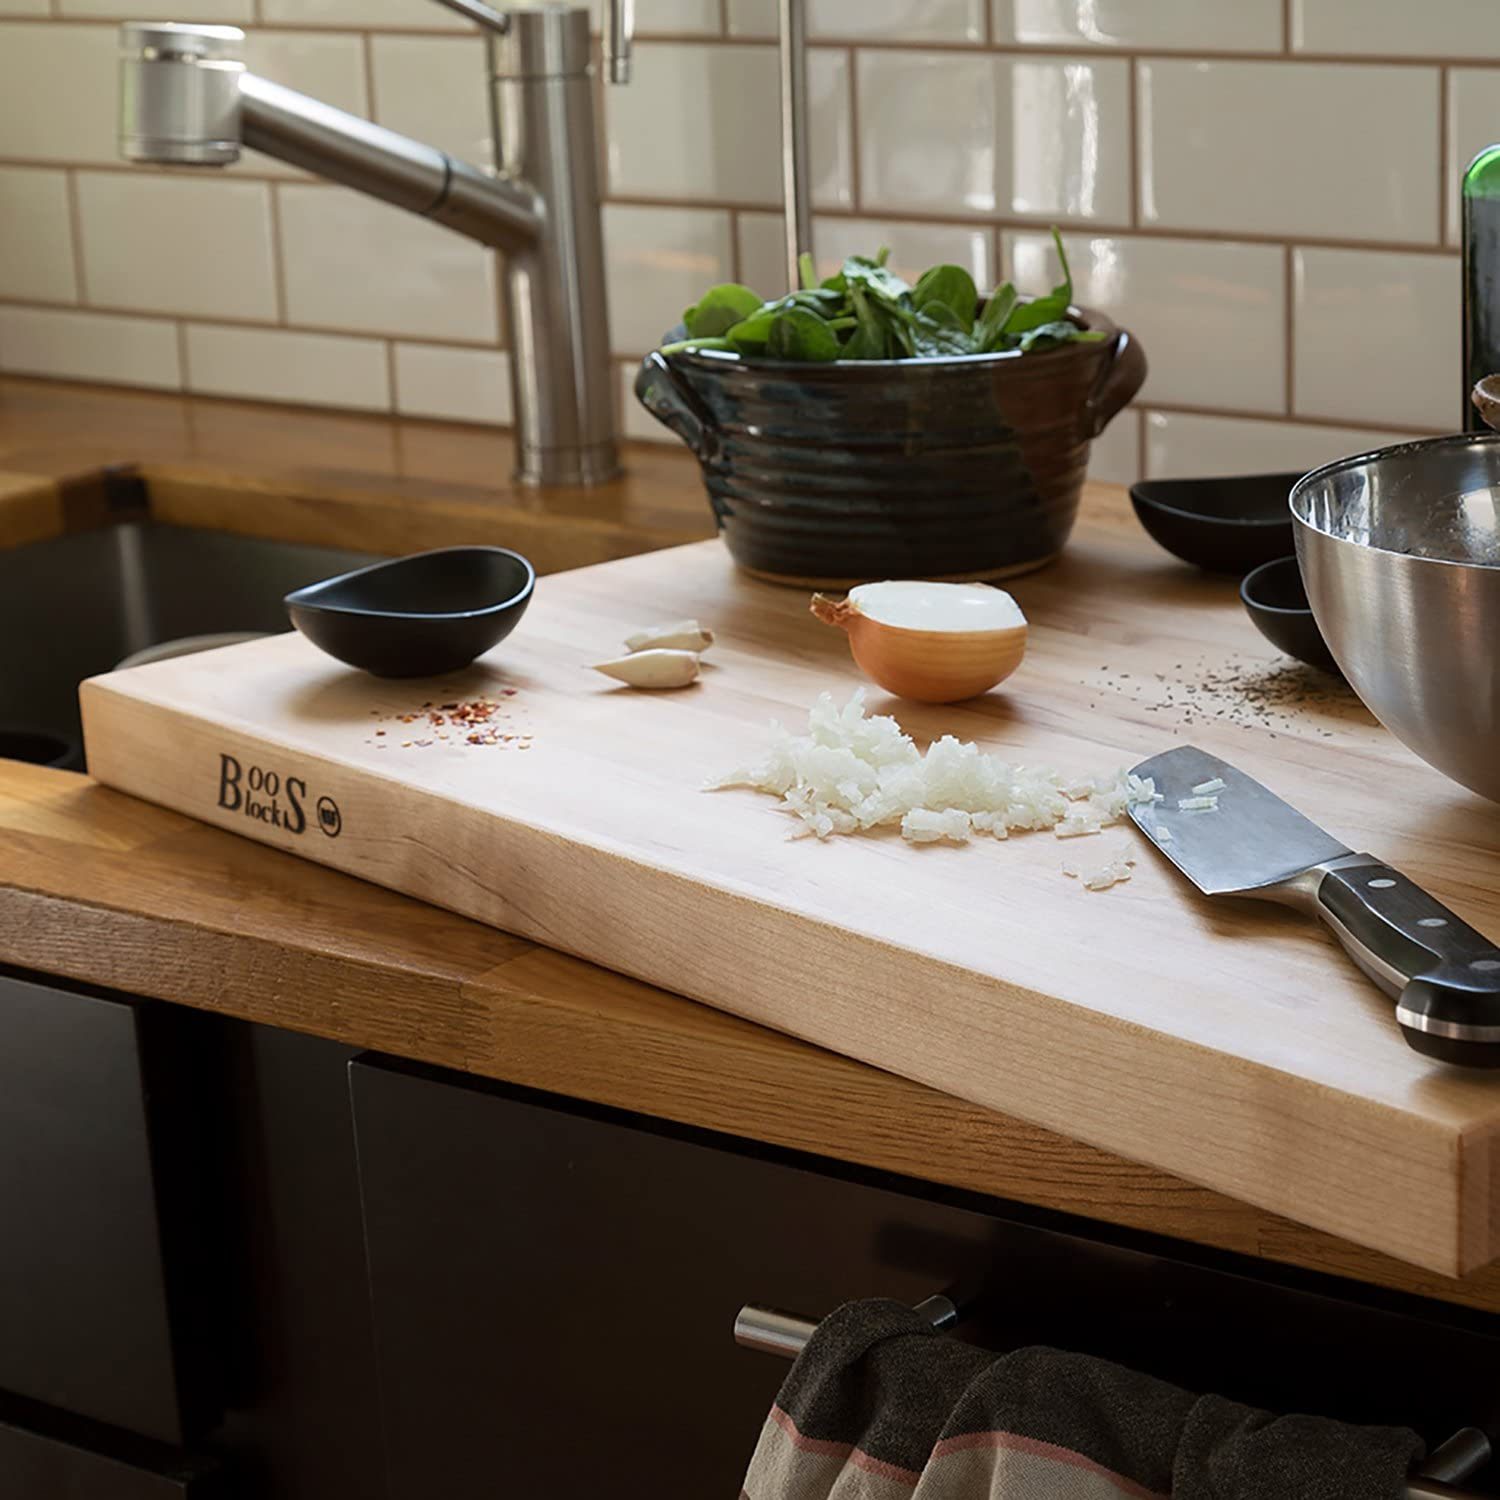 10 Best Kitchen Tools That Will Take Your Cooking Skills to New